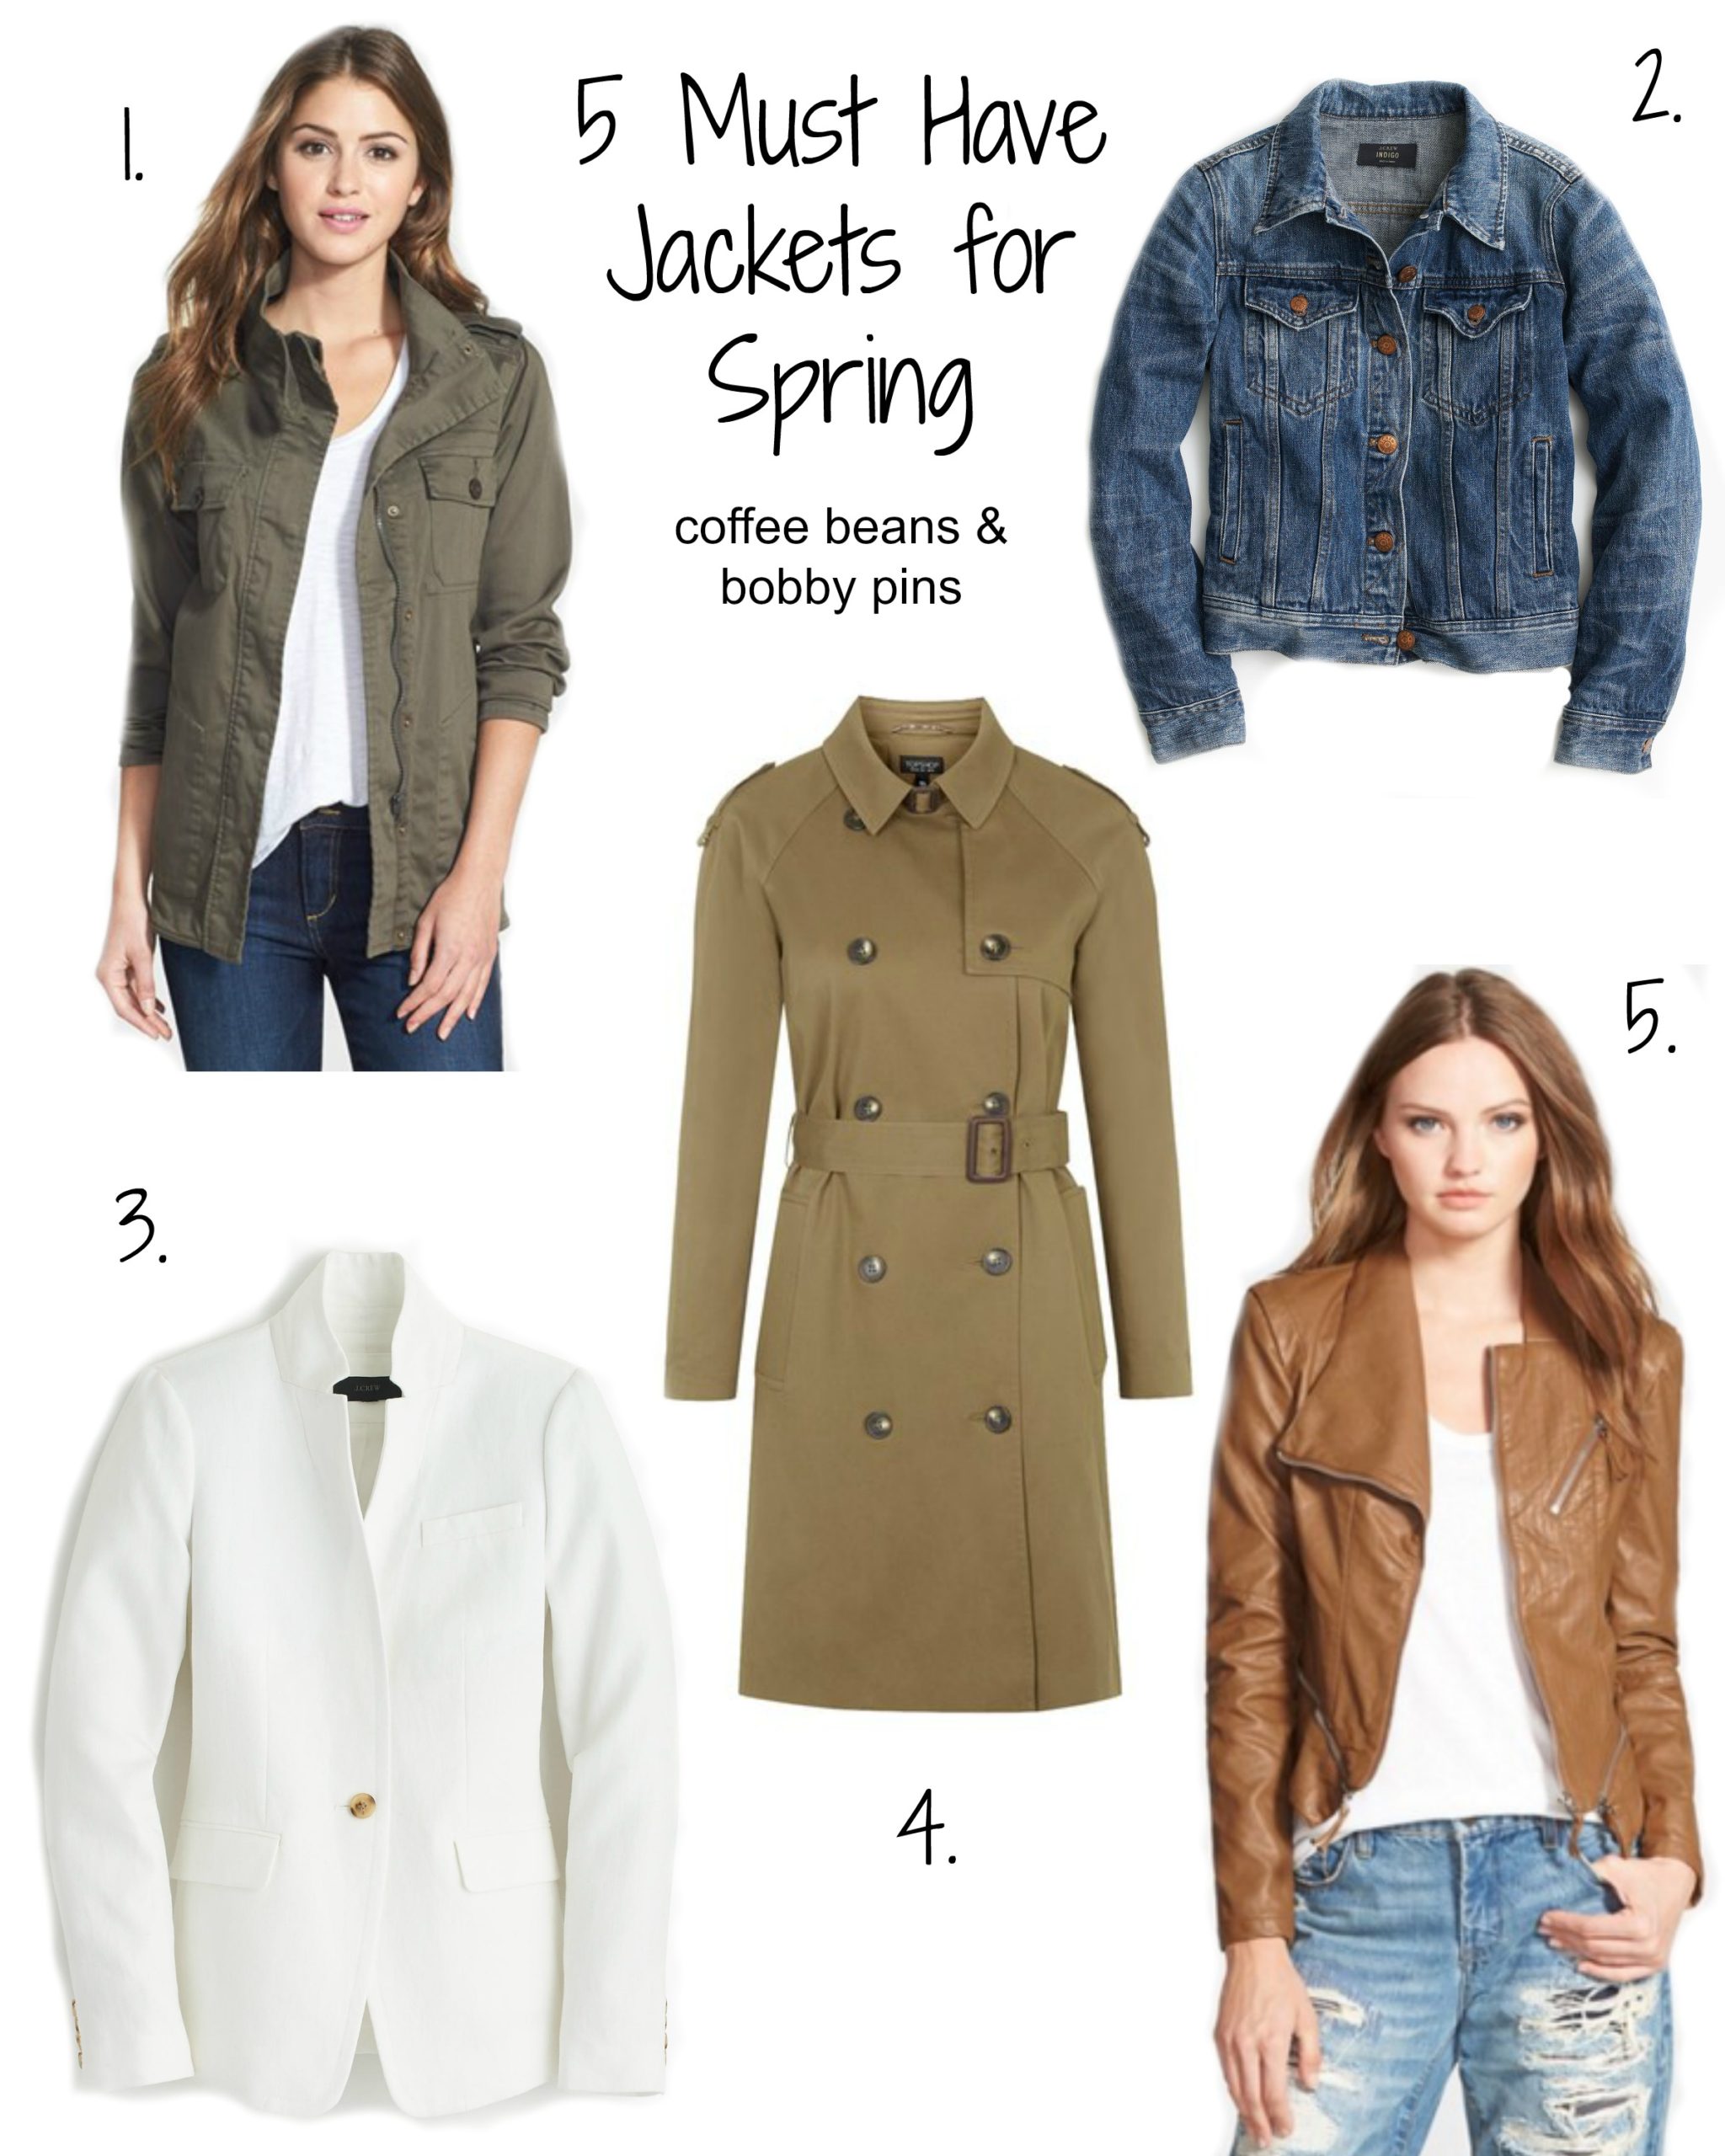 5 Must Have Jackets for Spring